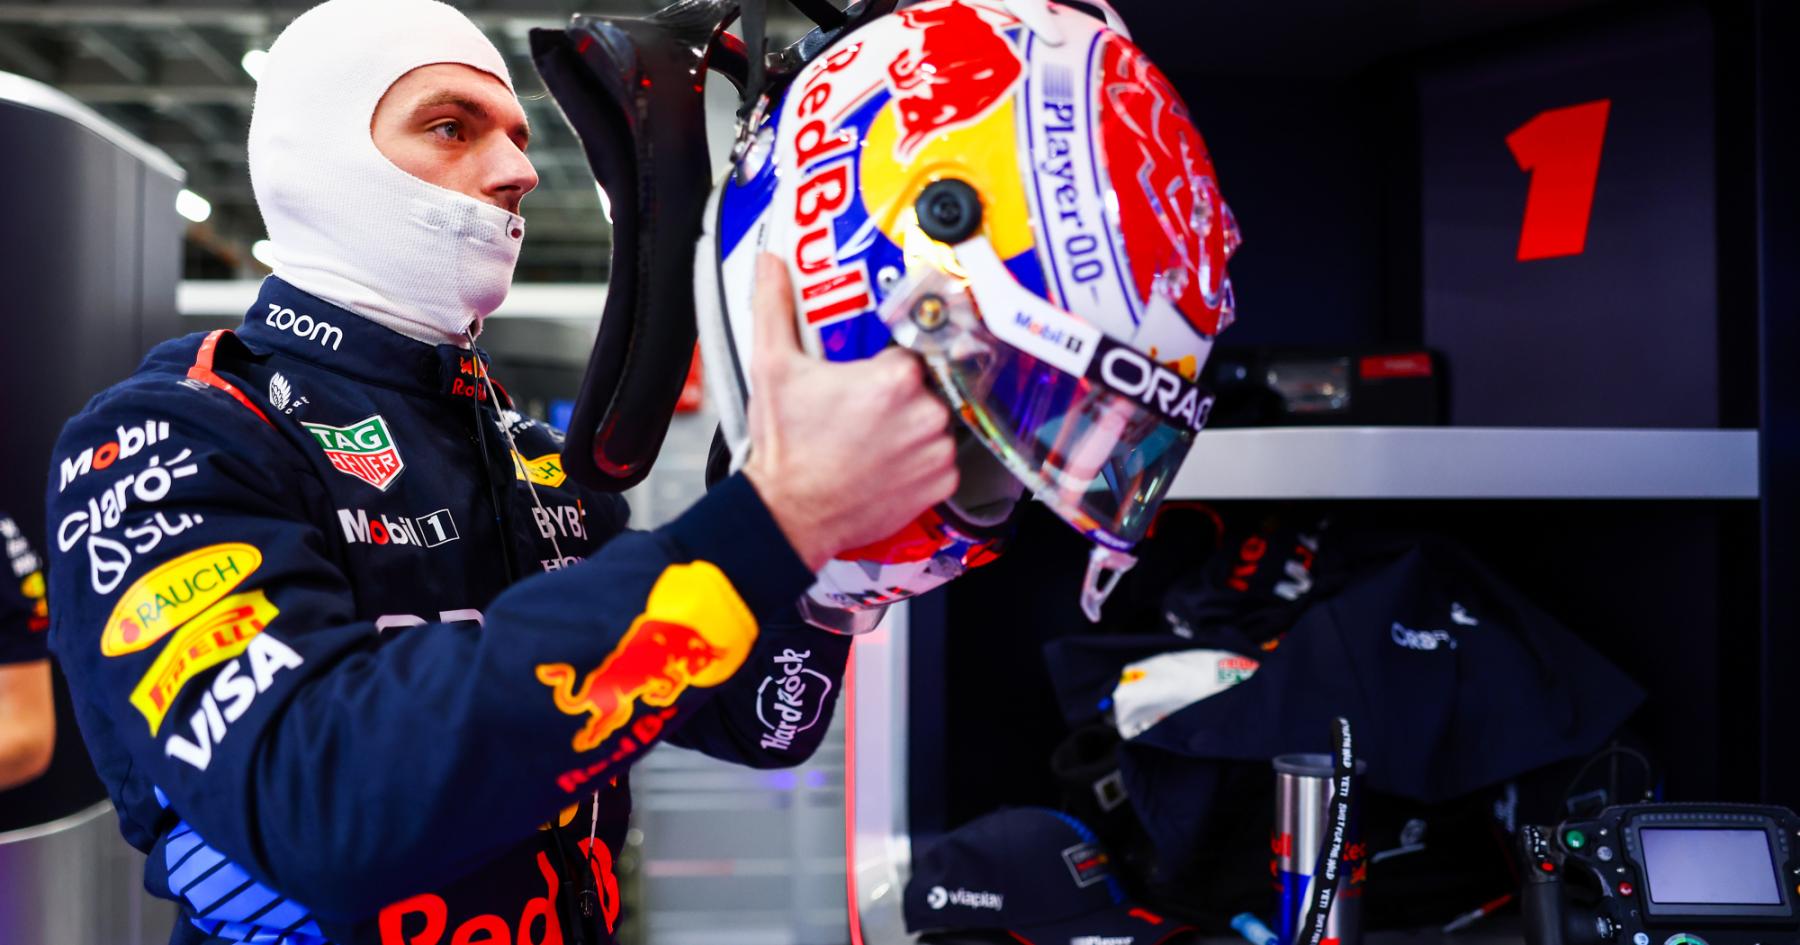 Revving Up Excitement: Verstappen Aims to Ignite the Australian Grand Prix with Pirelli Change